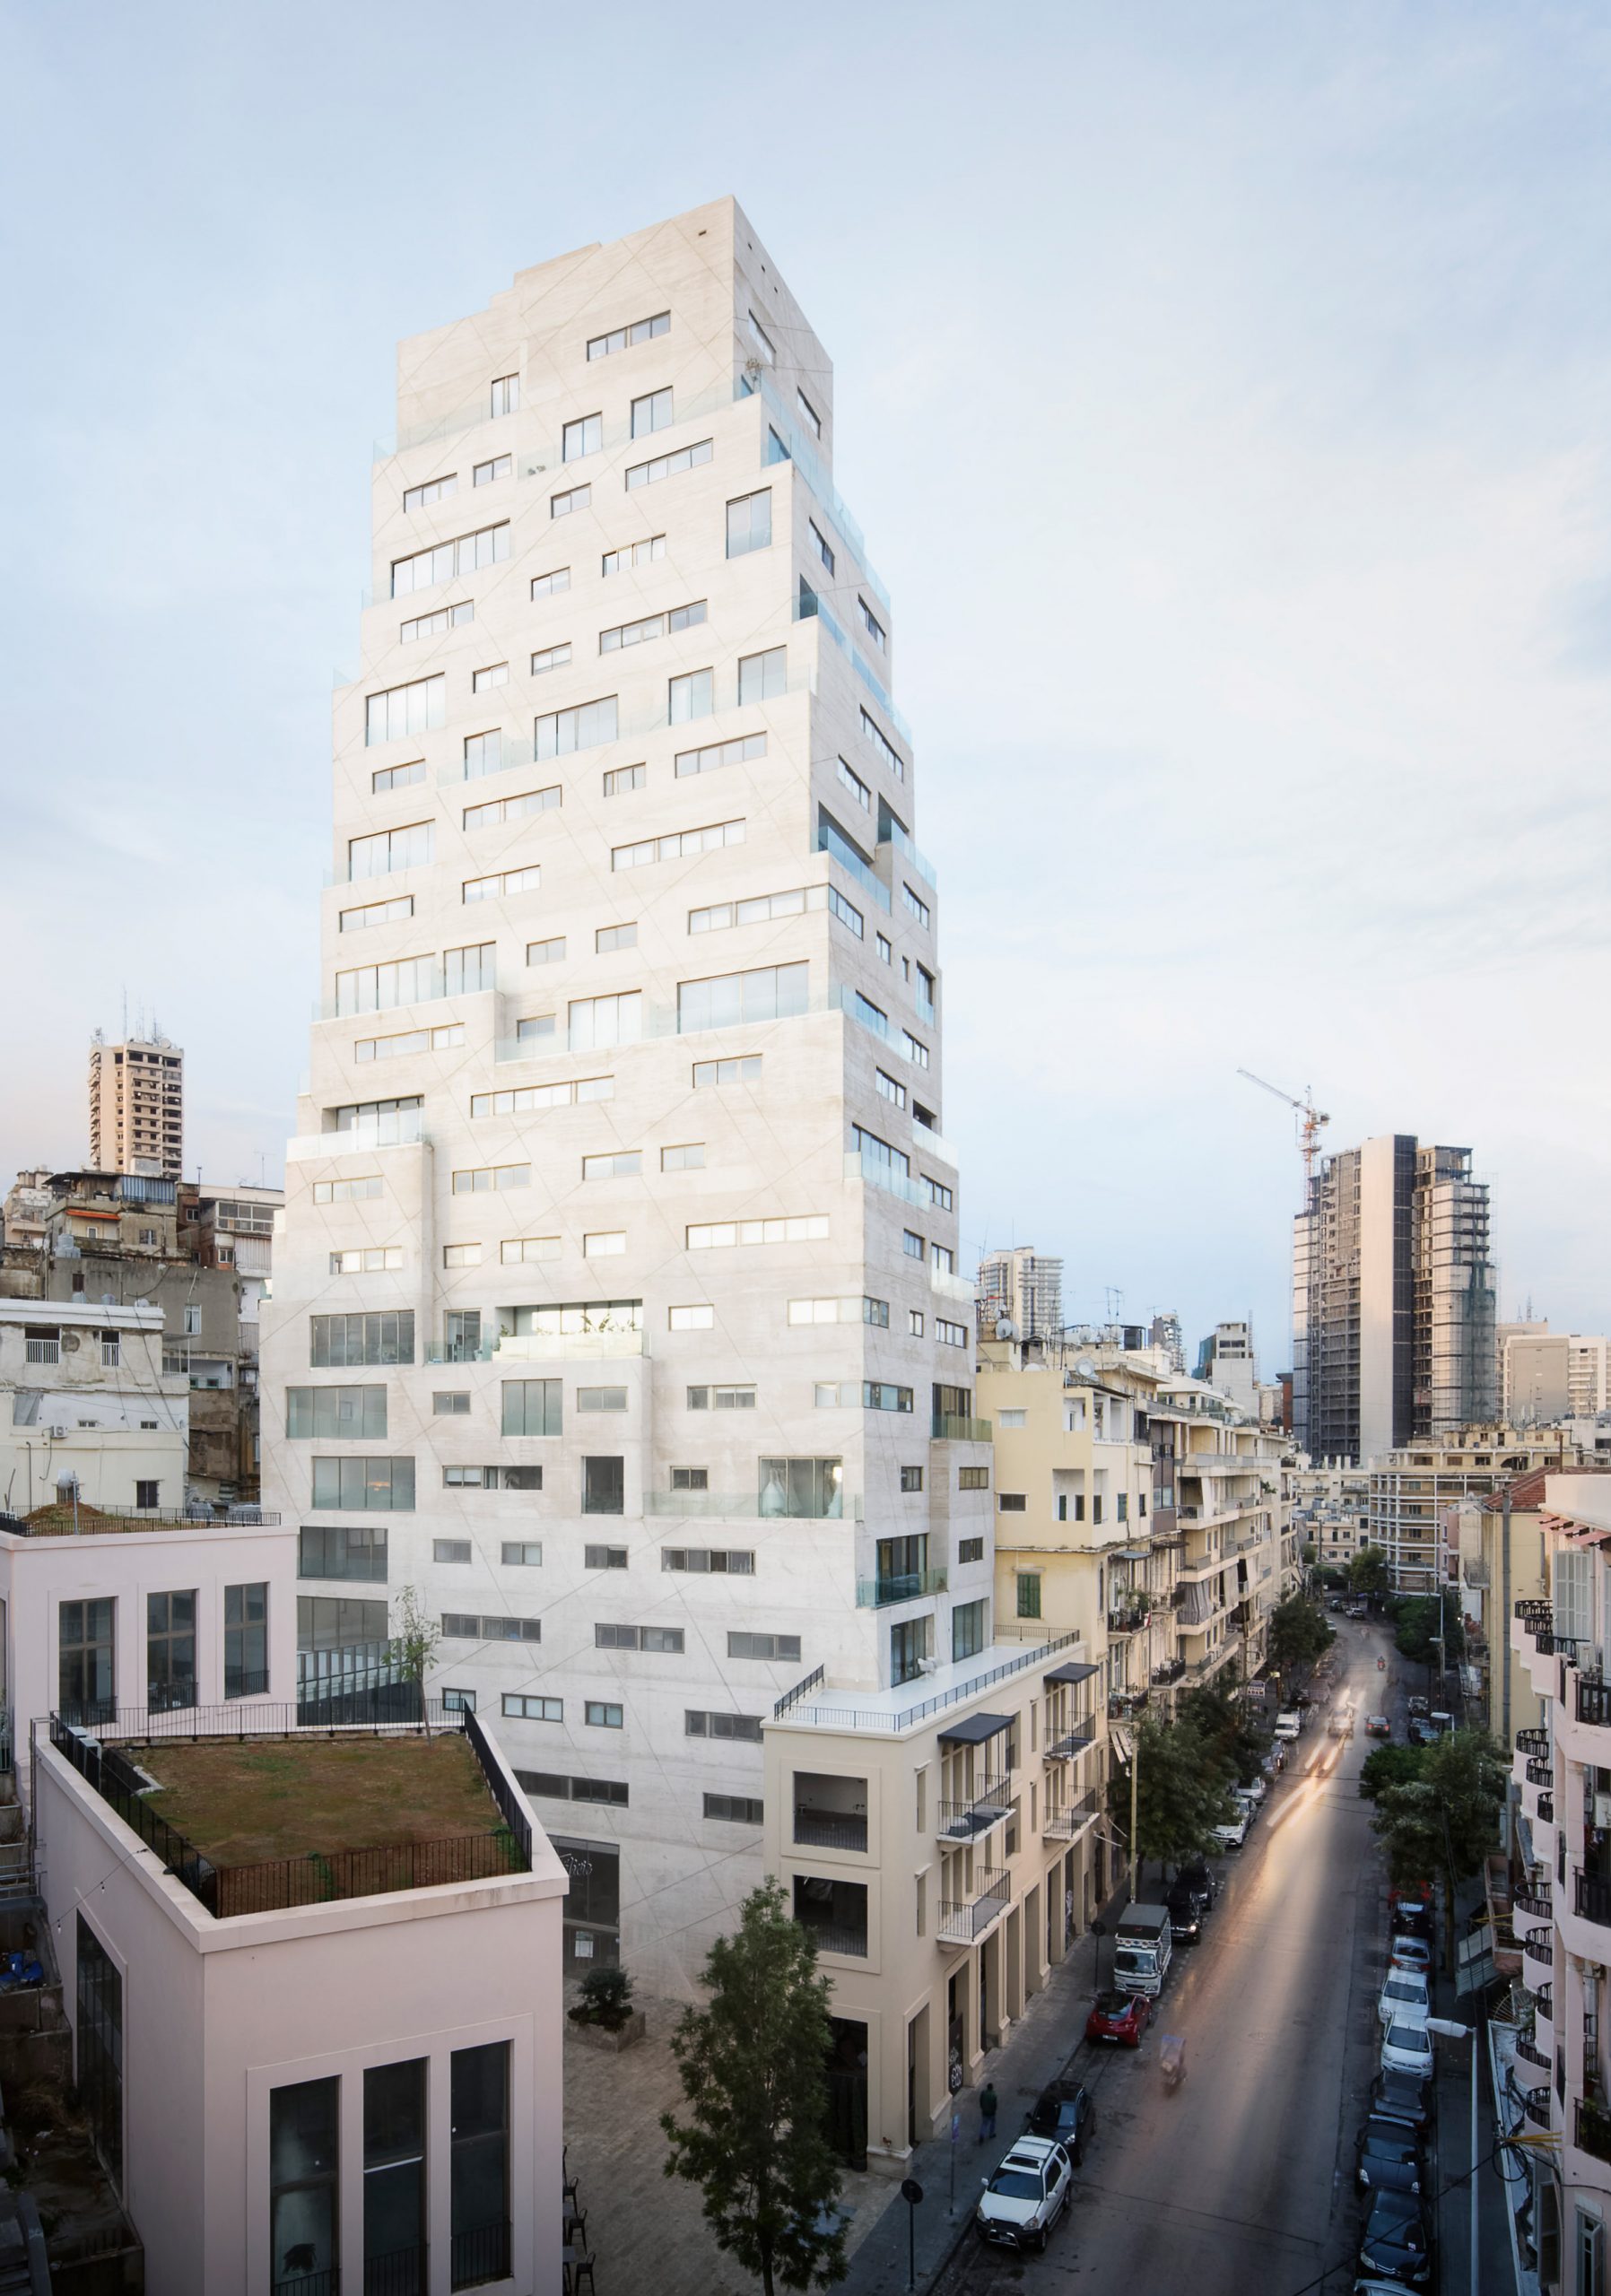 Street view of Aya Tower in Beirut by SOA Architectes